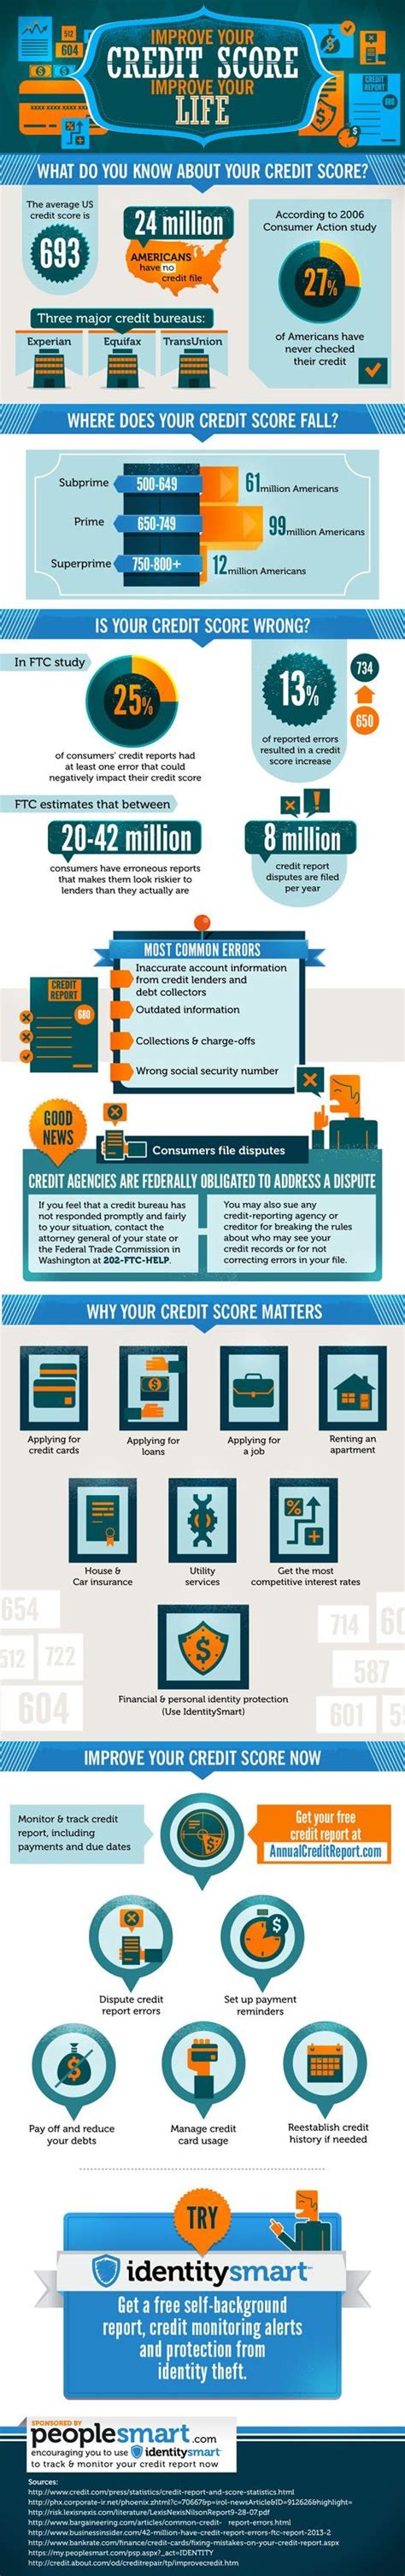 We did not find results for: 1CreditScore_40904_118-550 | Credit education, Improve your credit score, Credit score